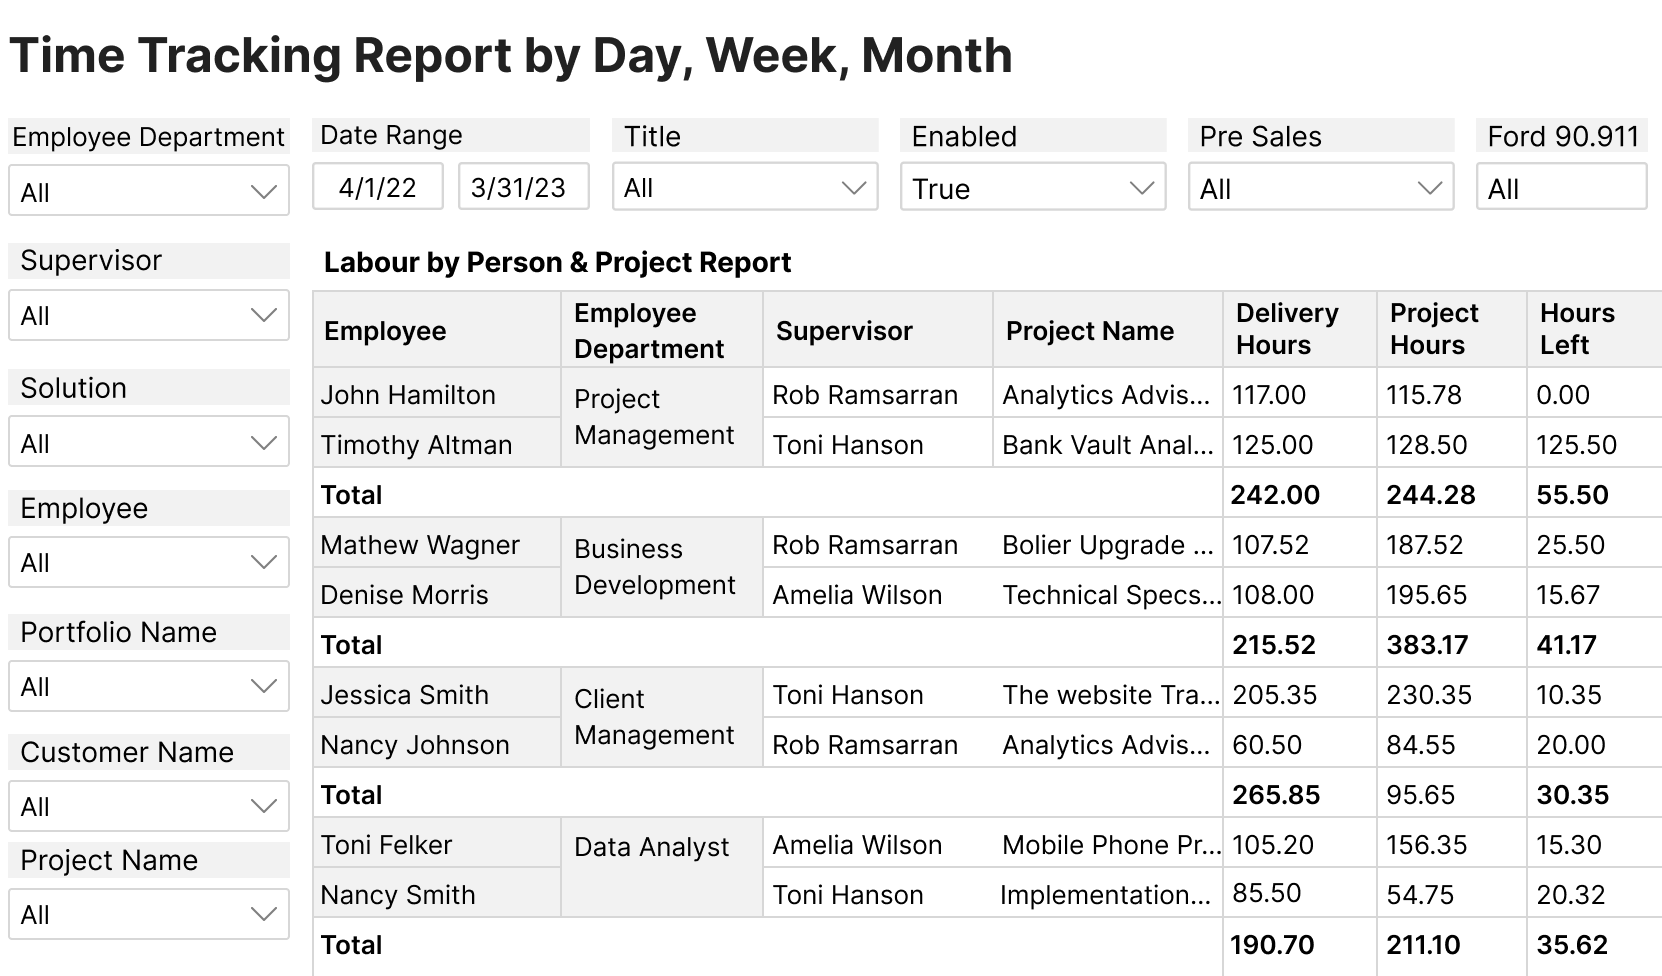 Time Tracking Report by Day, Week, Month (Labour by Person and Project) (1)